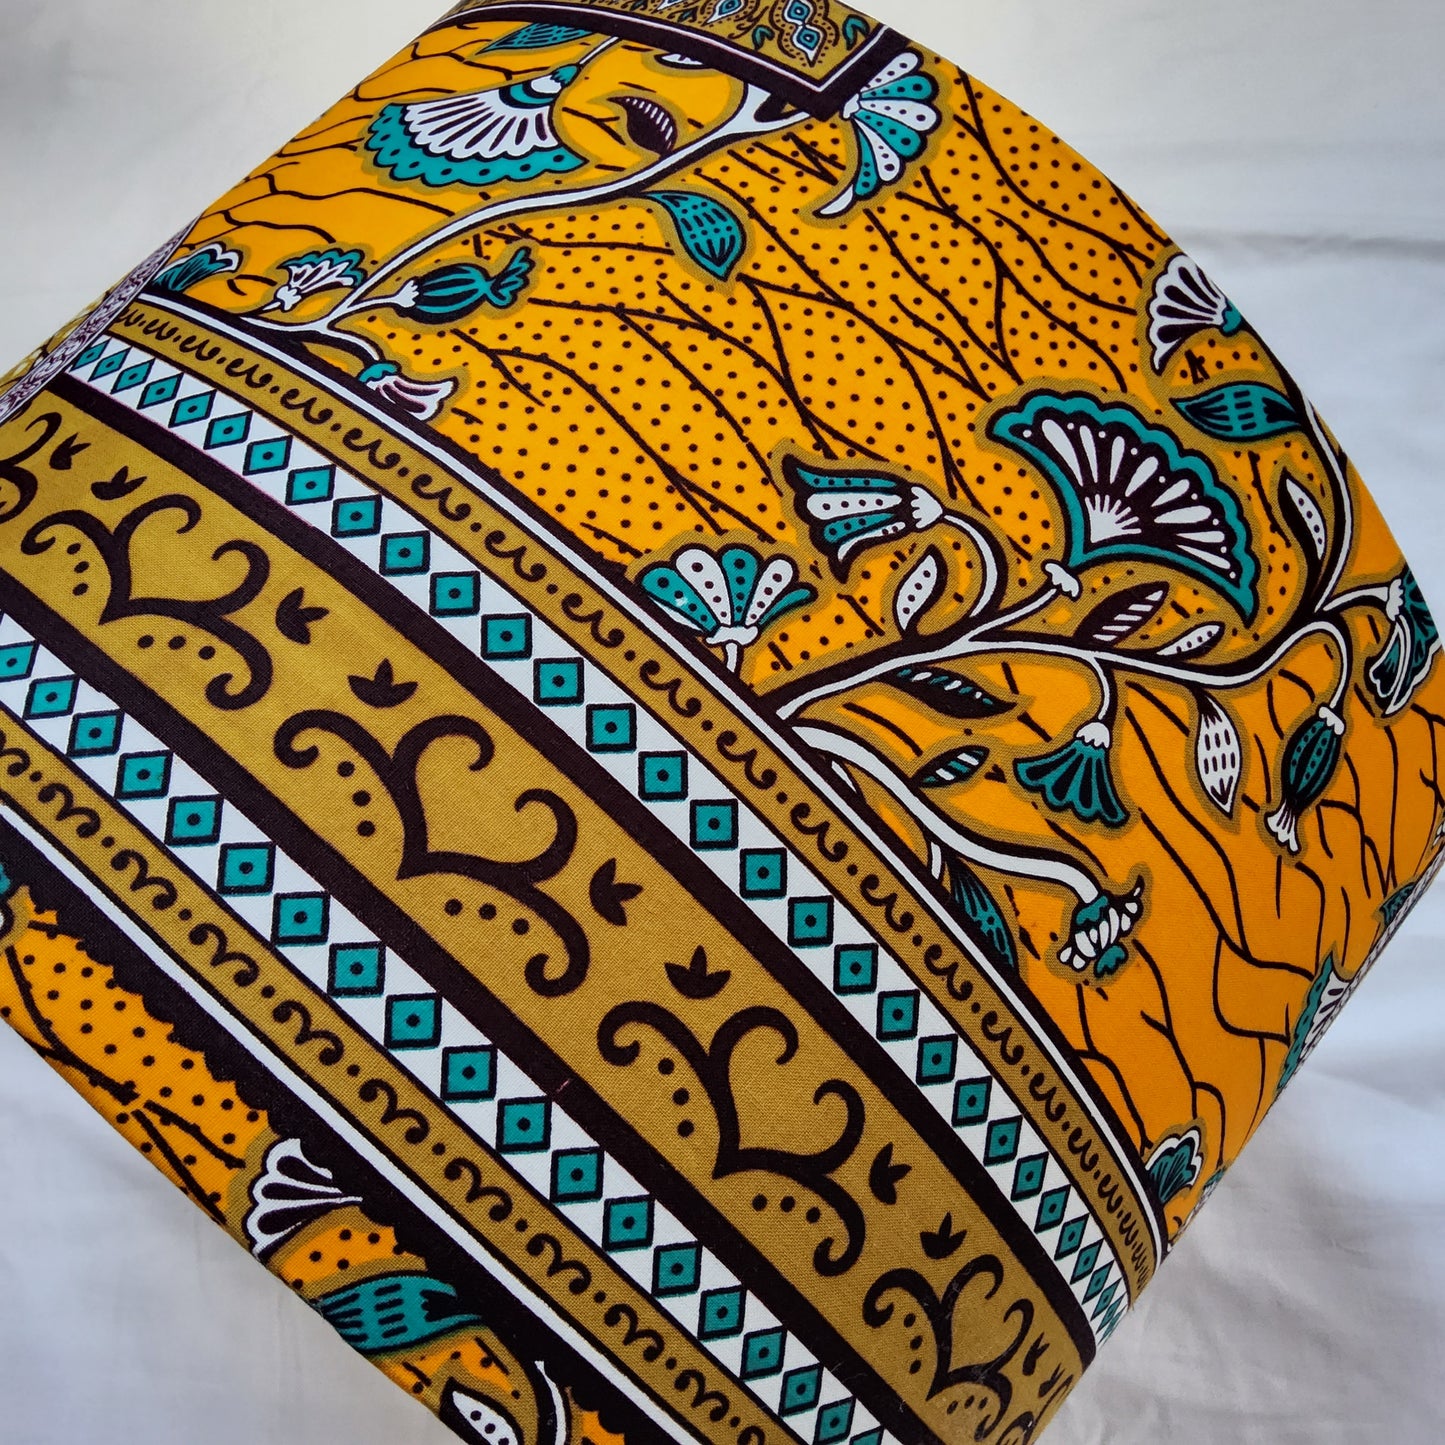 BESPOKE AFRO FUSION  LAMPSHADES - CHOOSE YOUR FABRICS FROM ASKA FABRICS COLLECTION